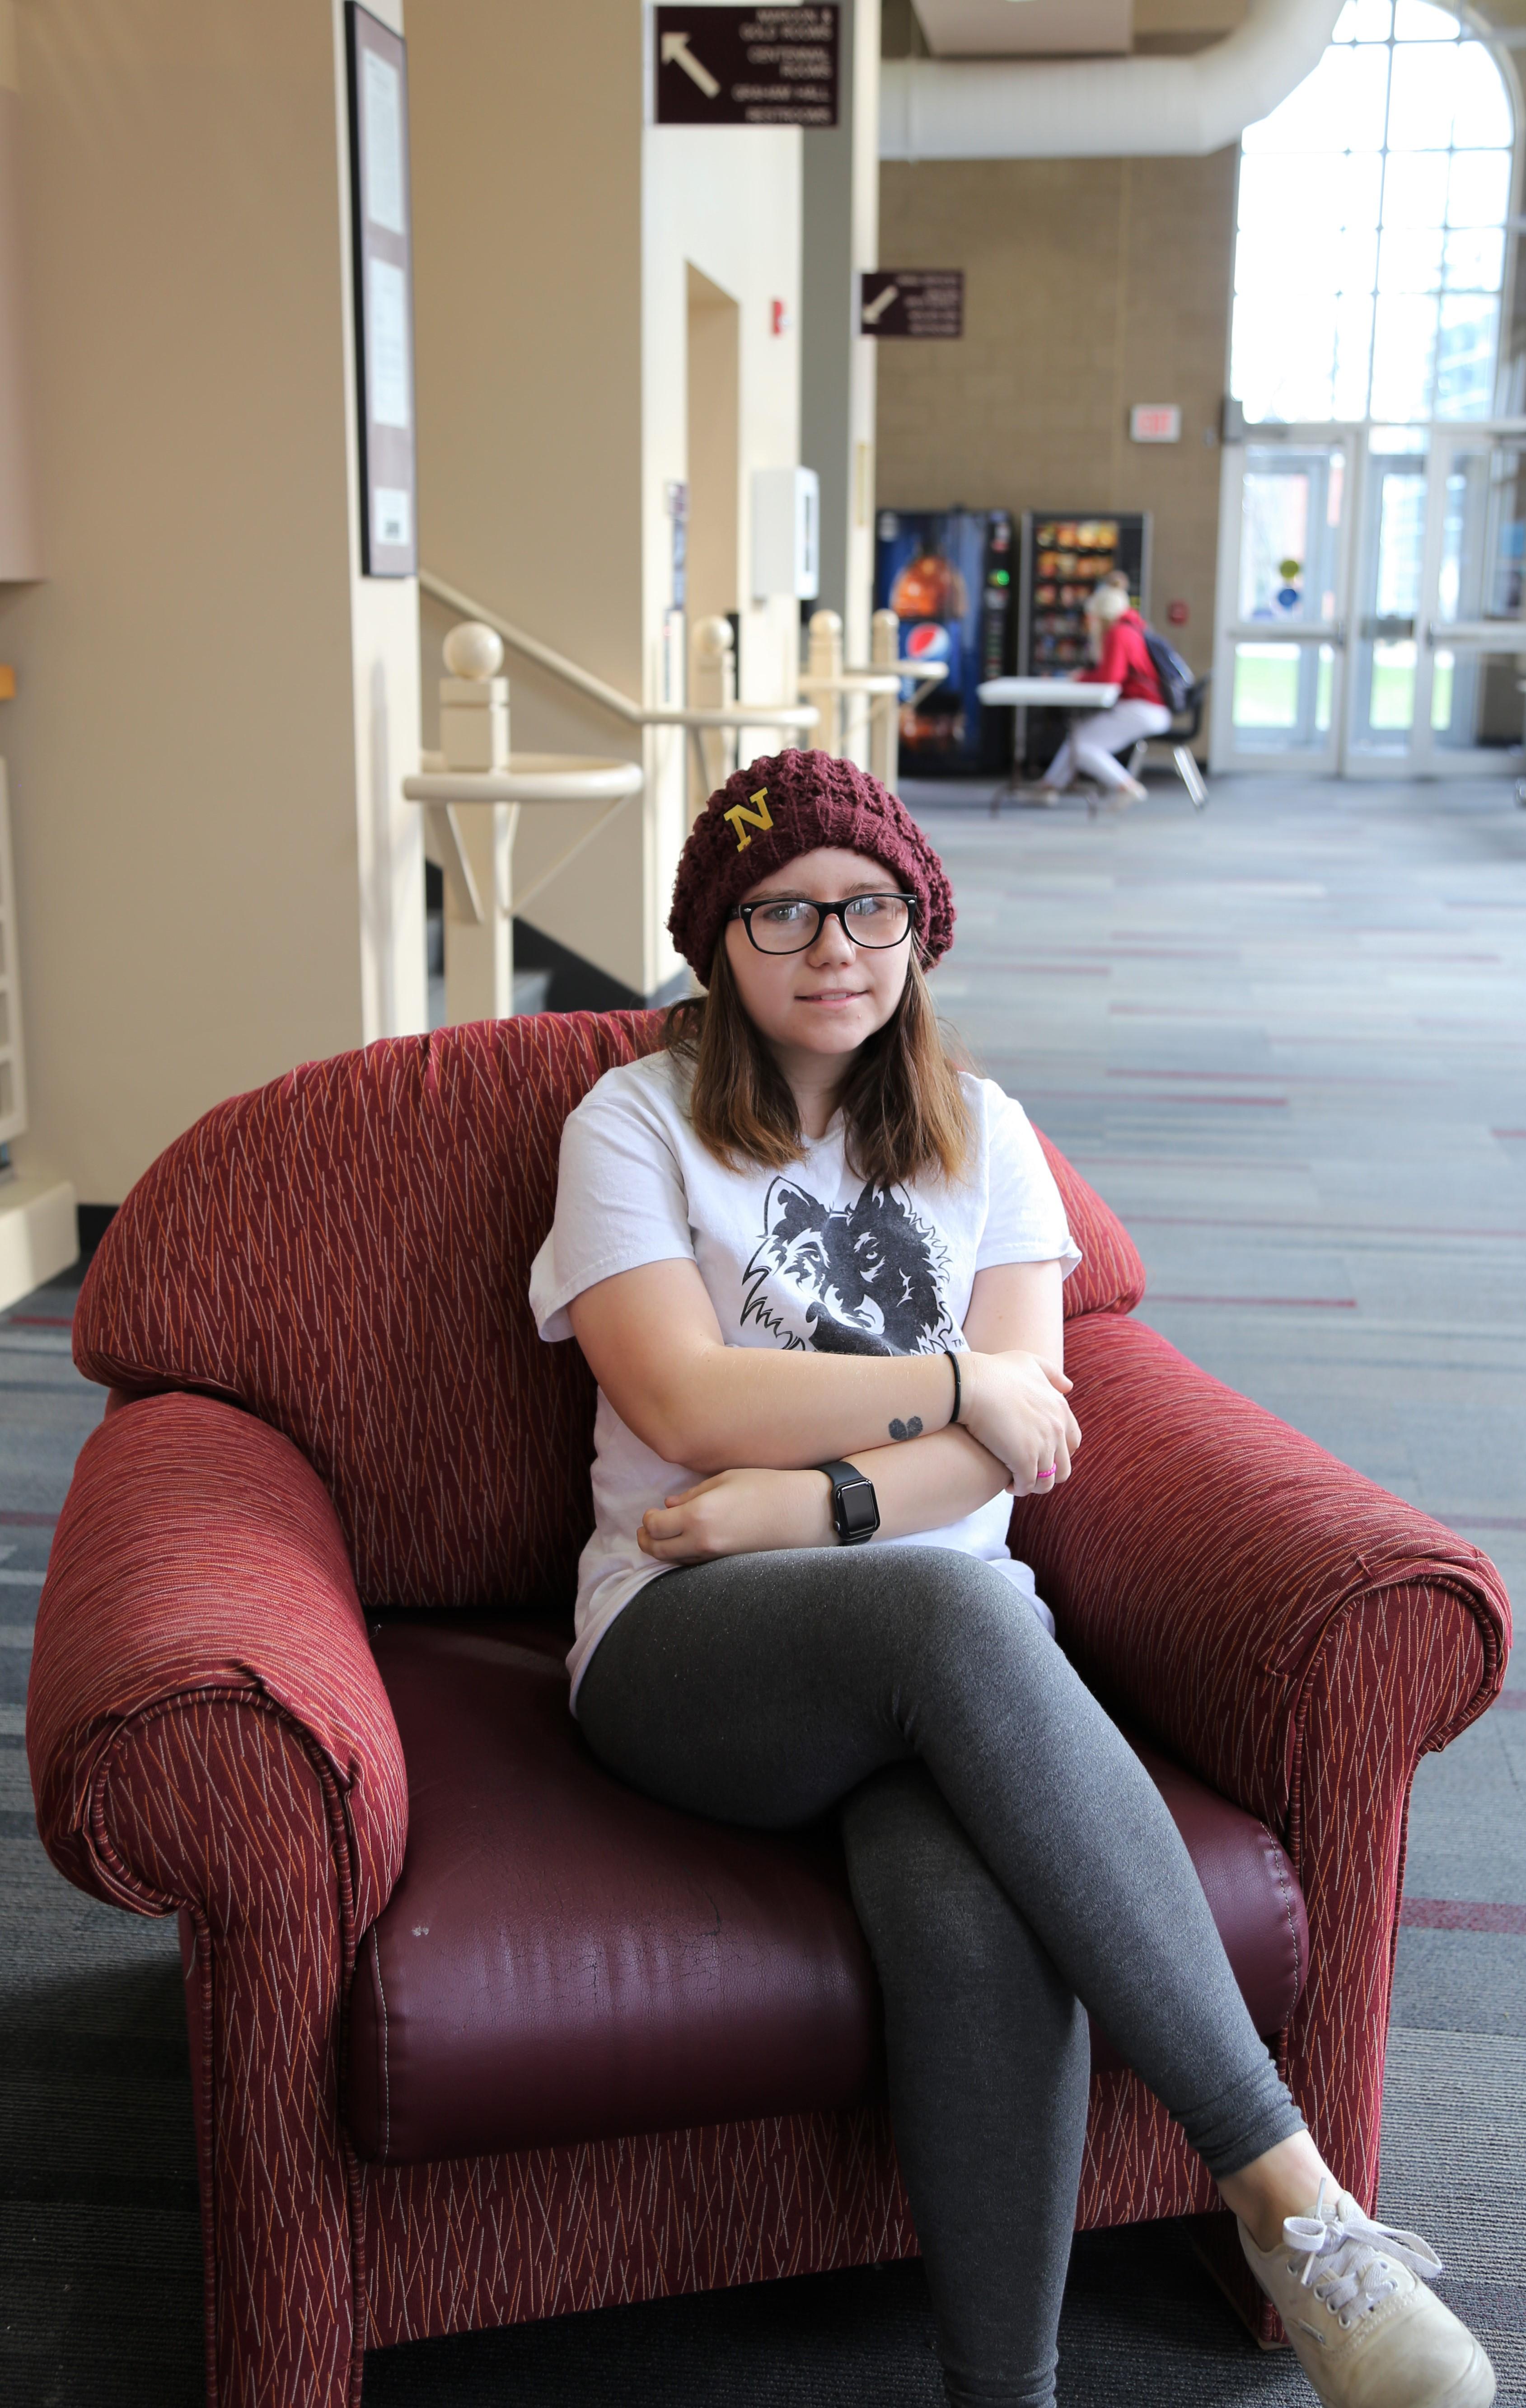 Student sitting on chair in student center